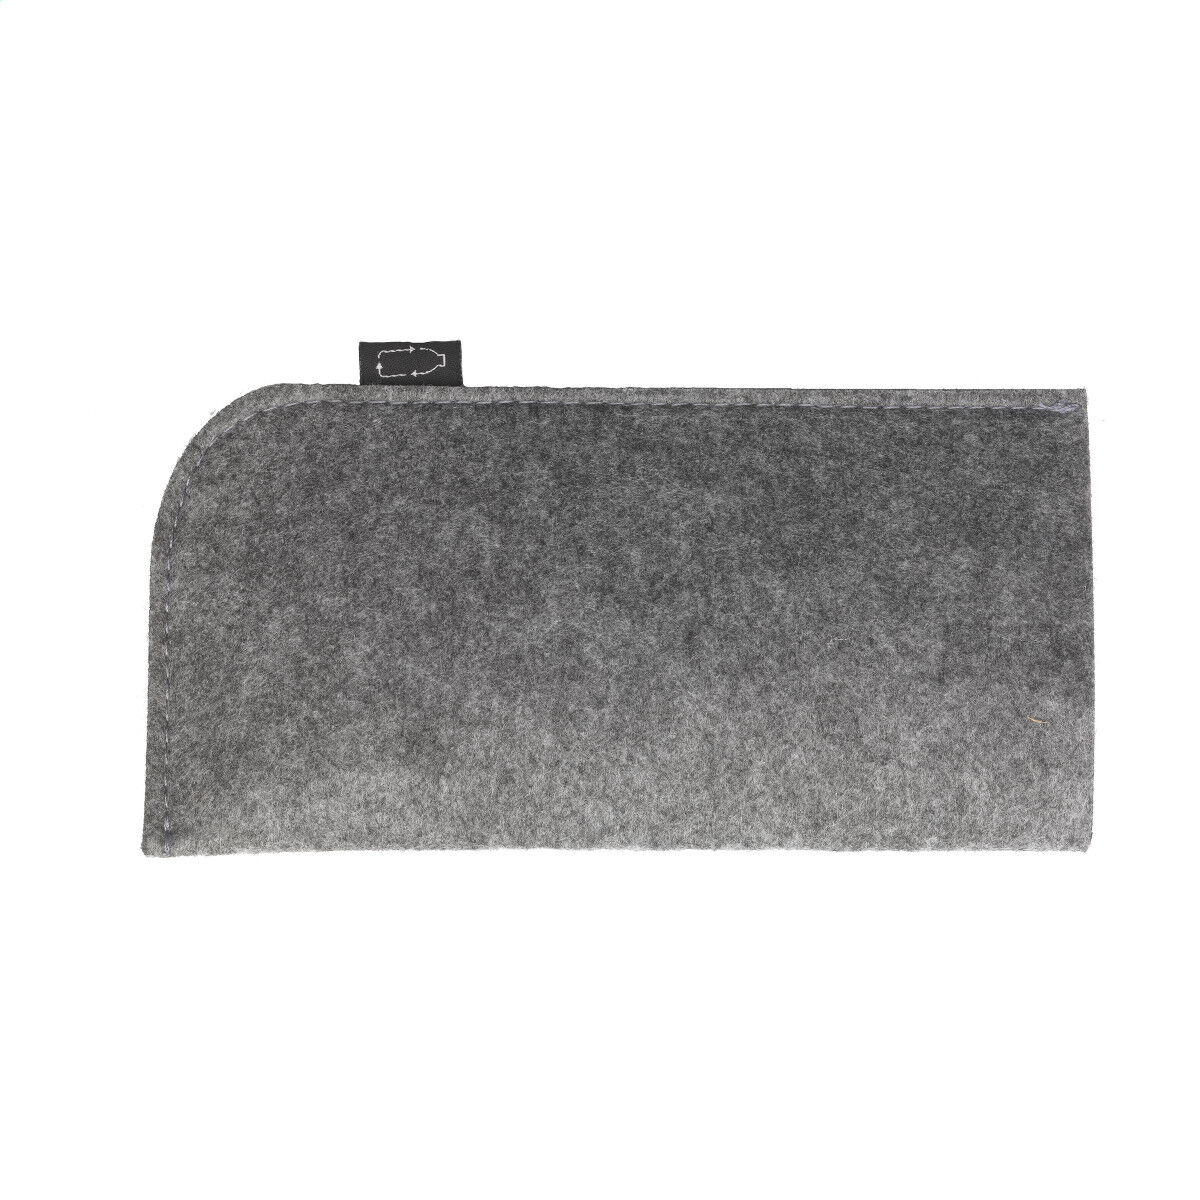 Felt Recycled RPET Pouch for Glasses